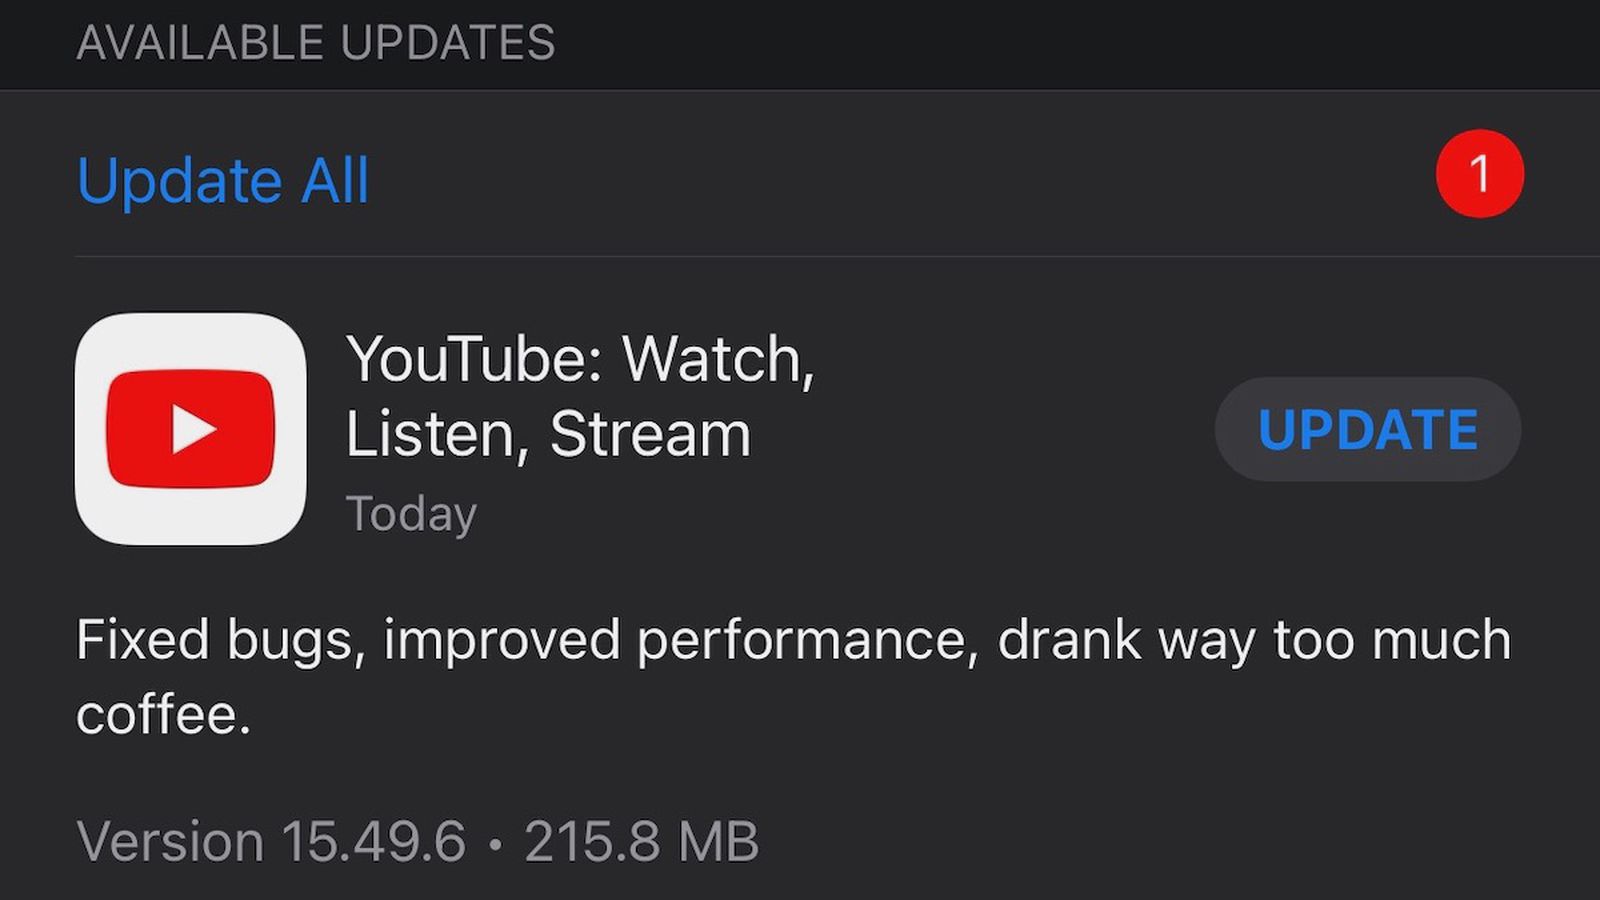 The YouTube YouTube App will get its first update in two months